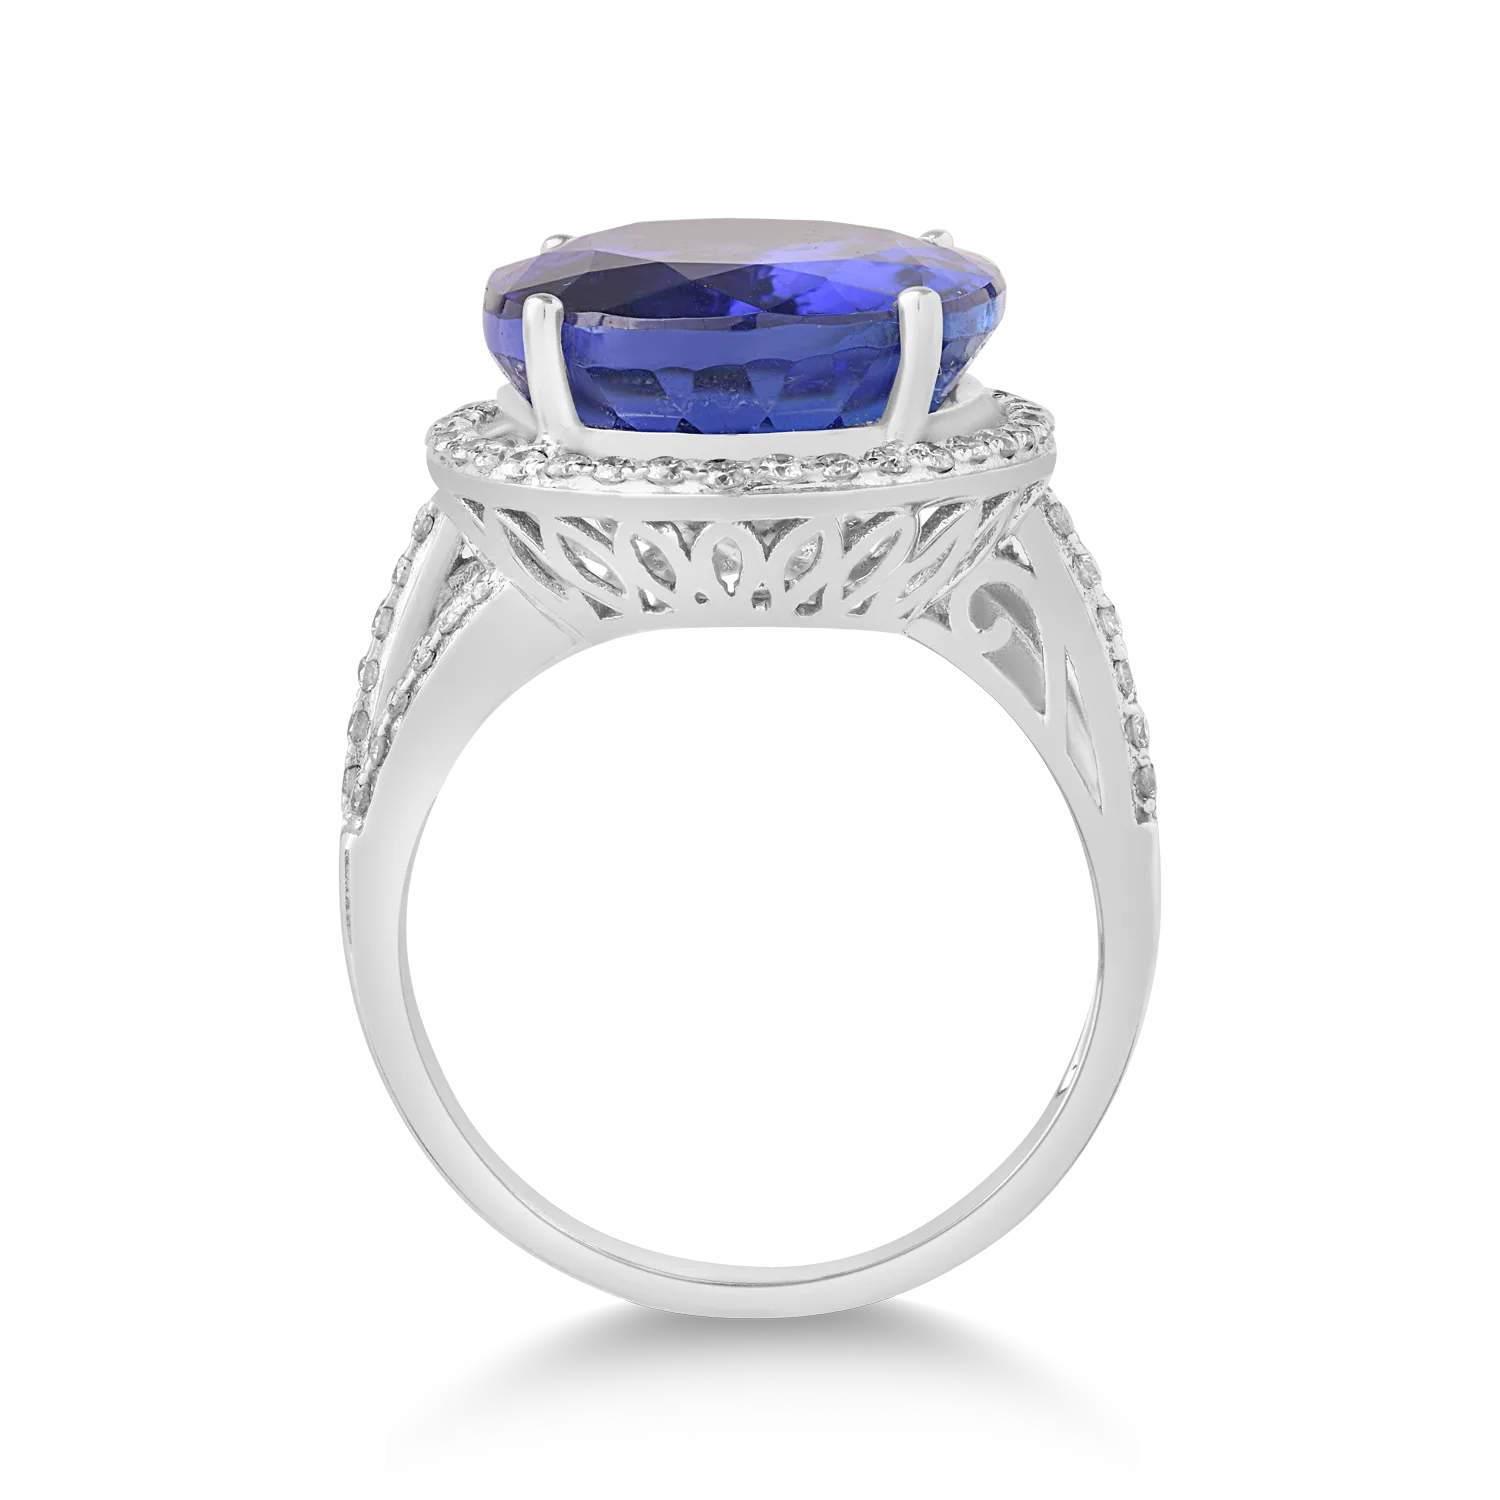 18K white gold ring with tanzanite of 12.36ct and diamonds of 0.44ct